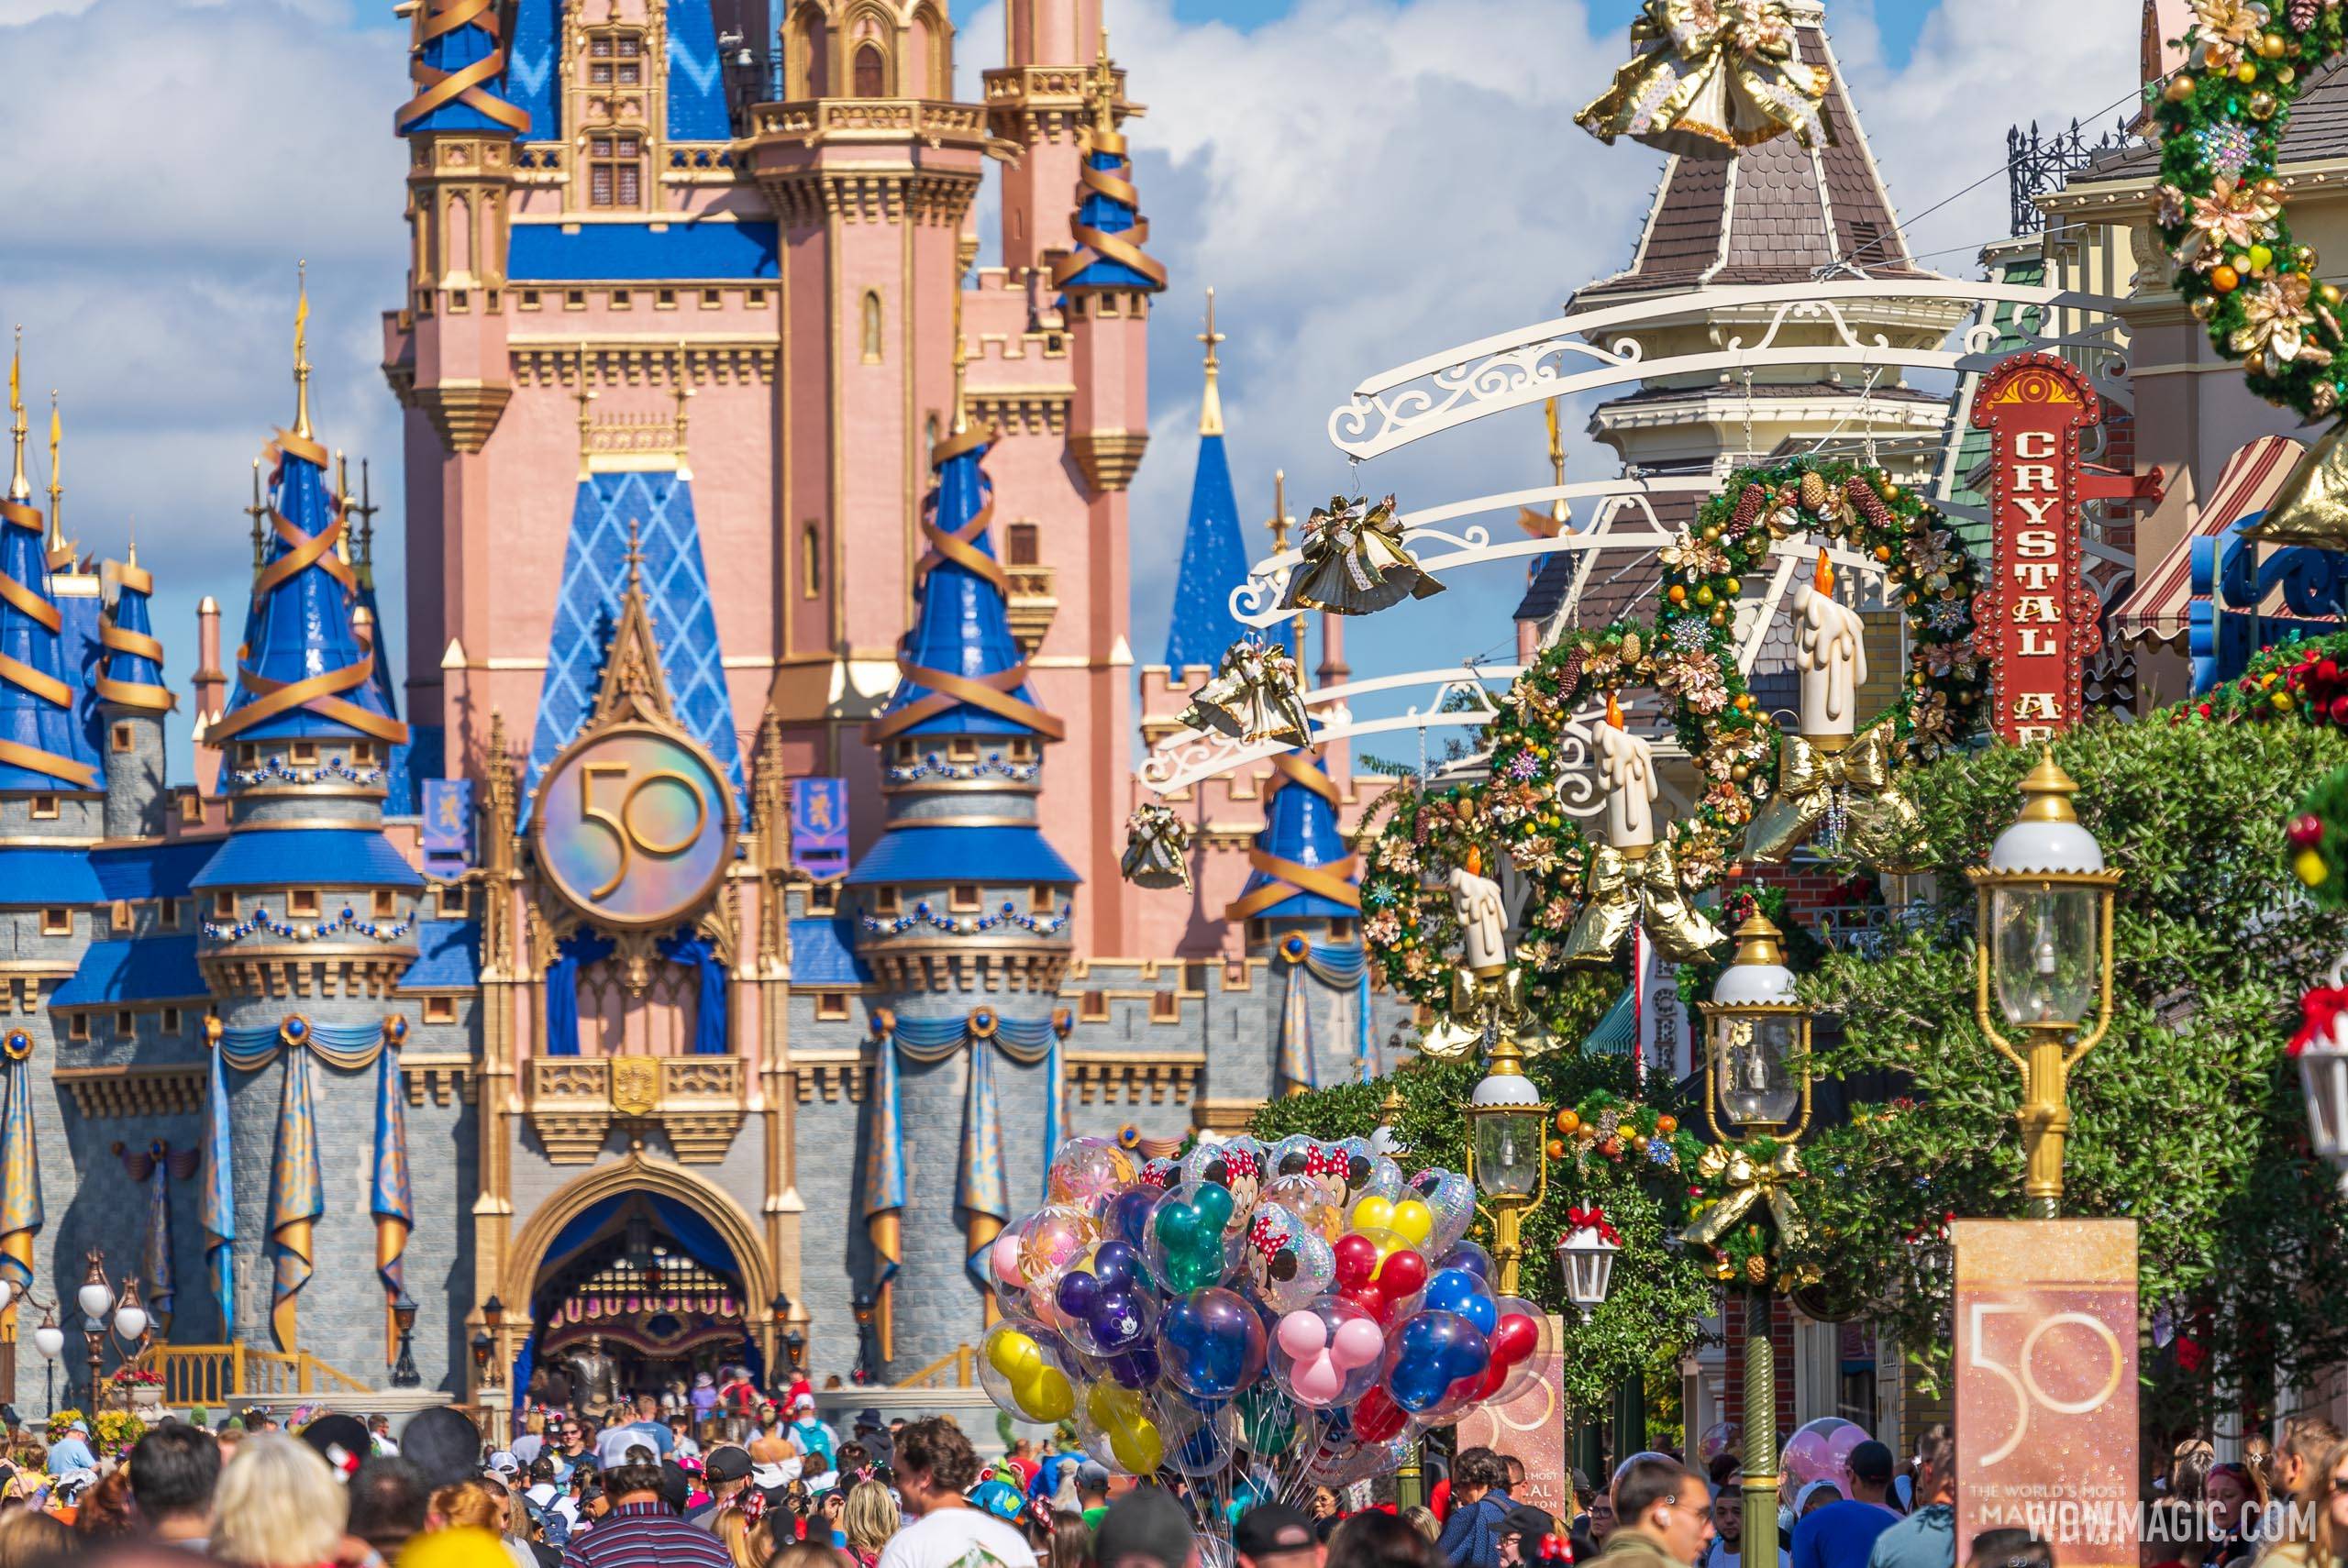 Magic Kingdom has longer hours during November in this latest update